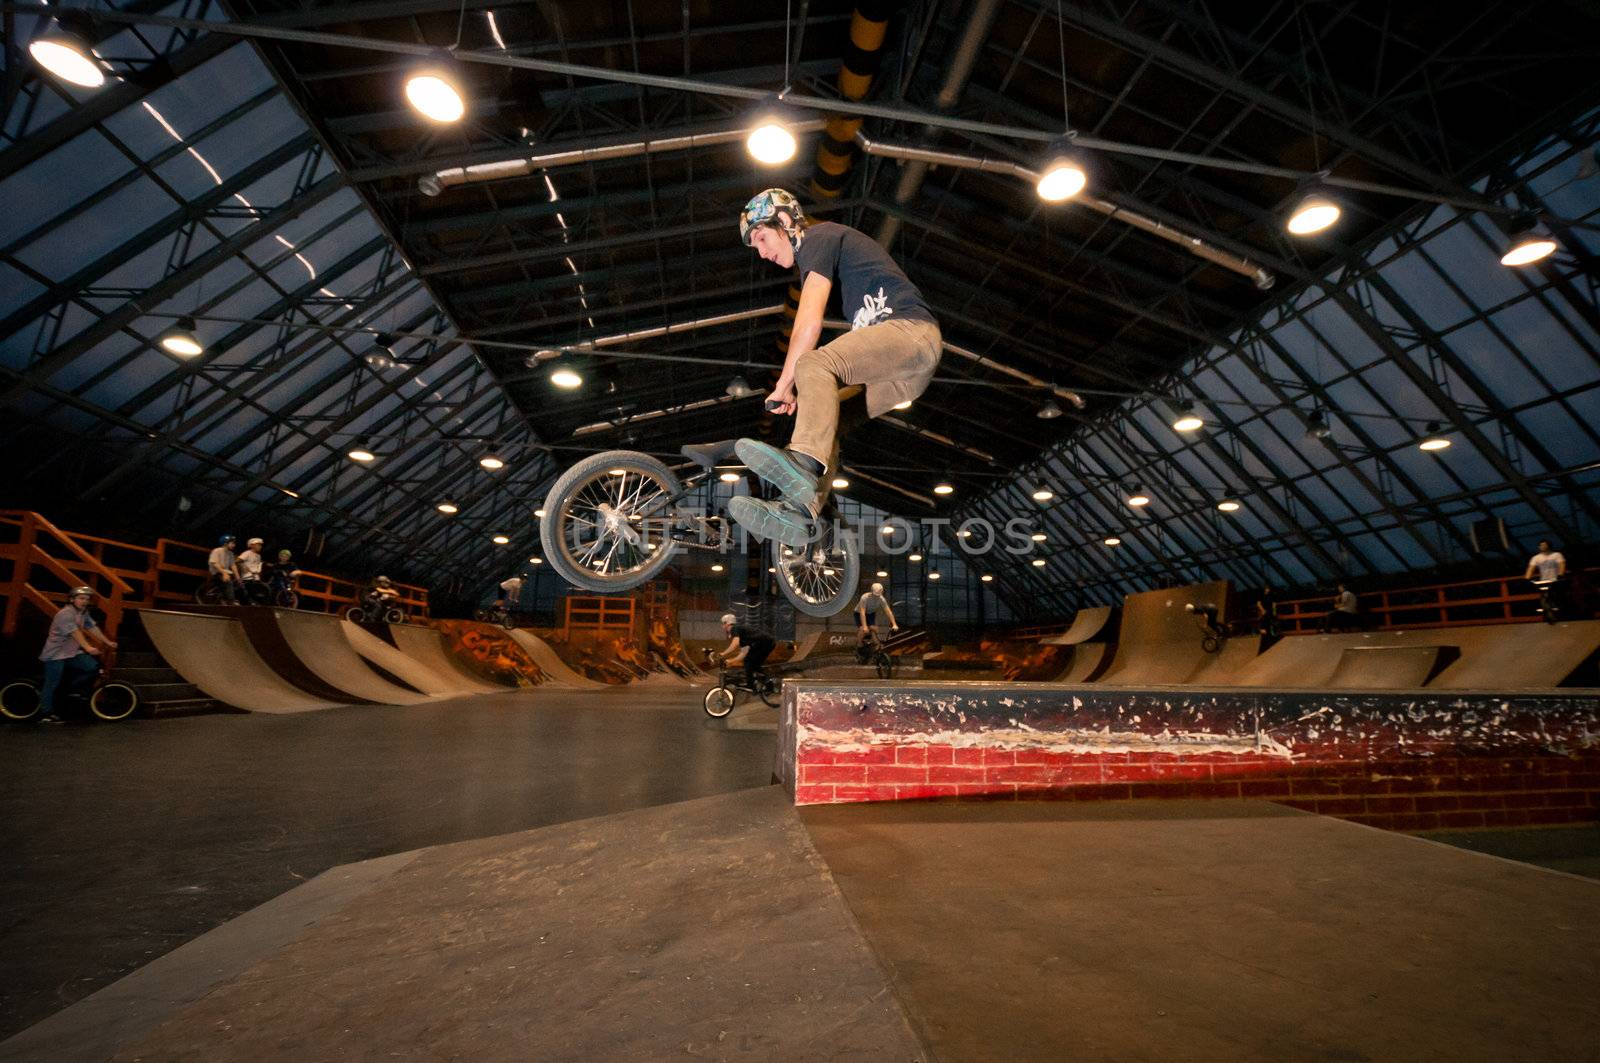 Biker doing tail whip trick in wooden park